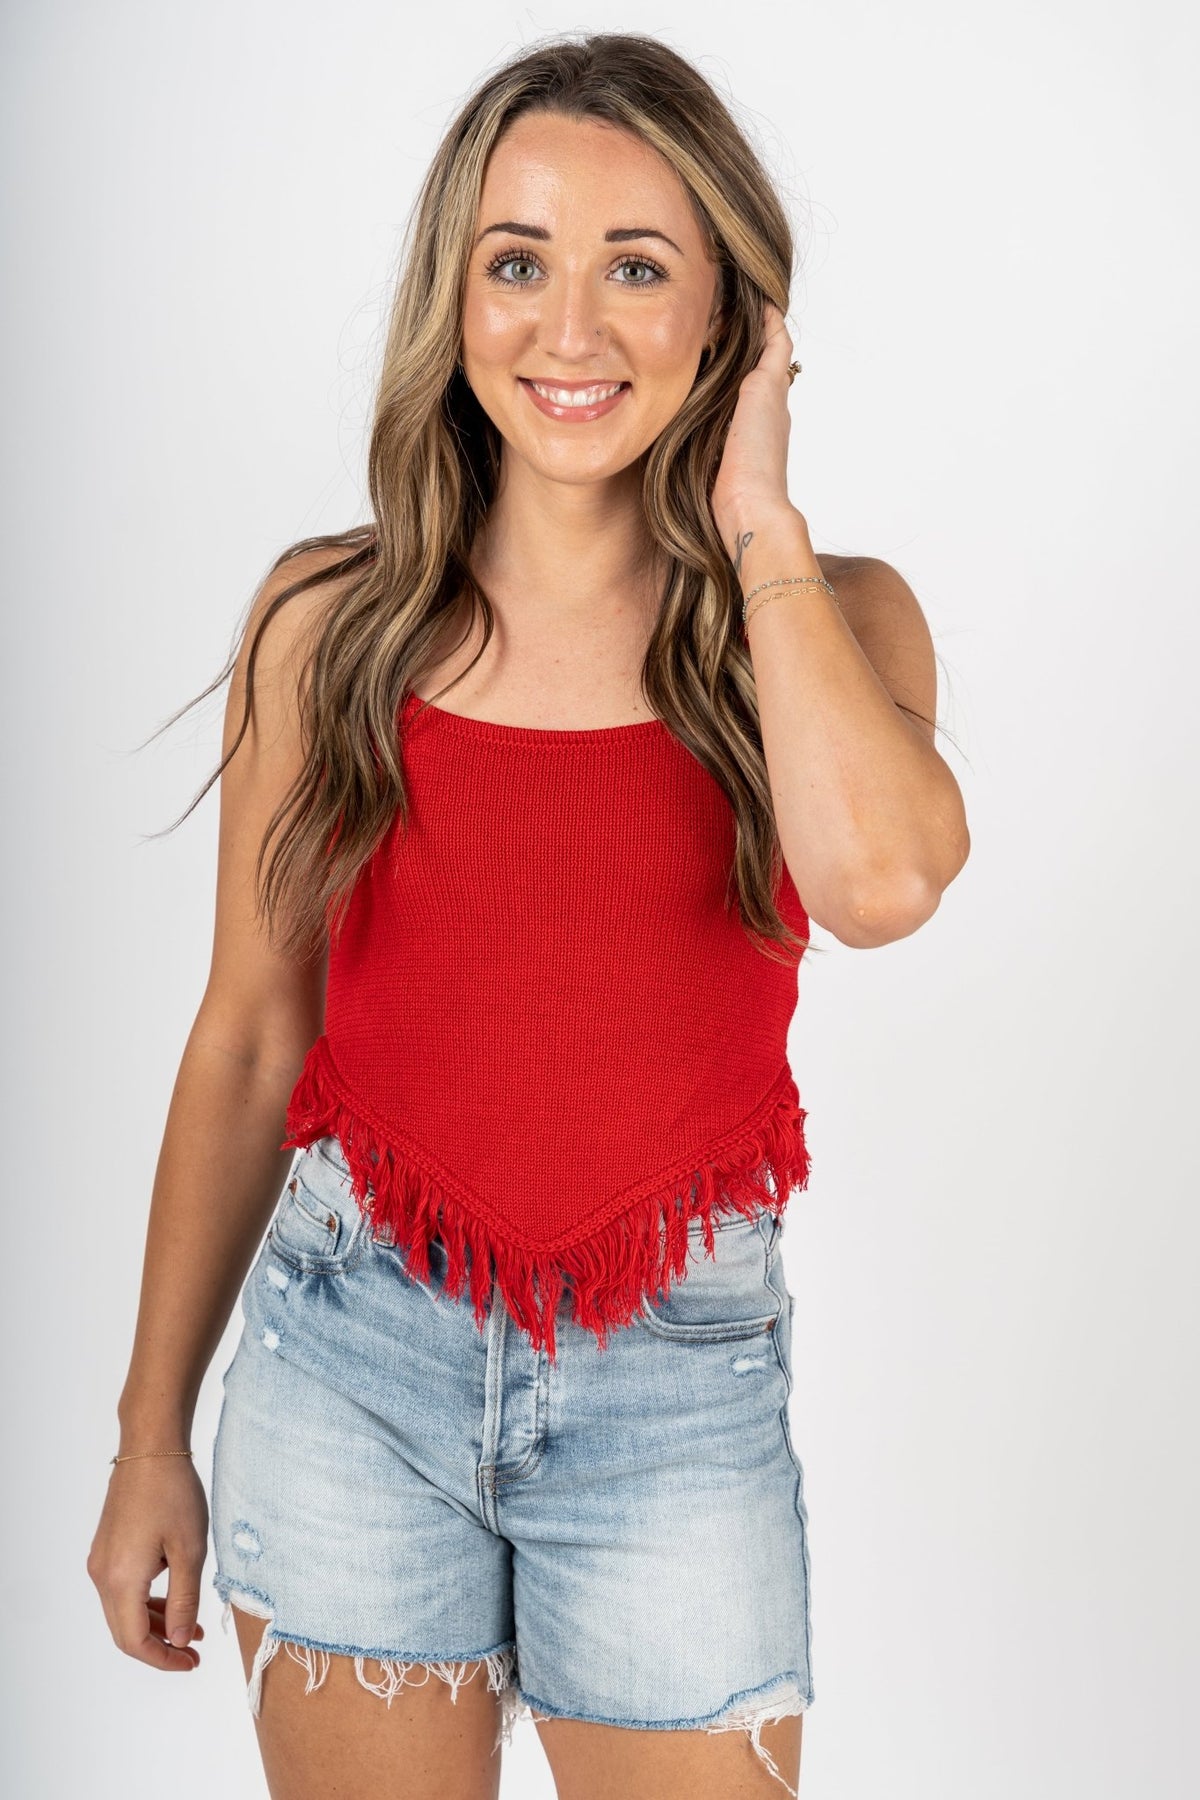 Fringe knit tank top red - Cute tank top - Trendy Tank Tops at Lush Fashion Lounge Boutique in Oklahoma City